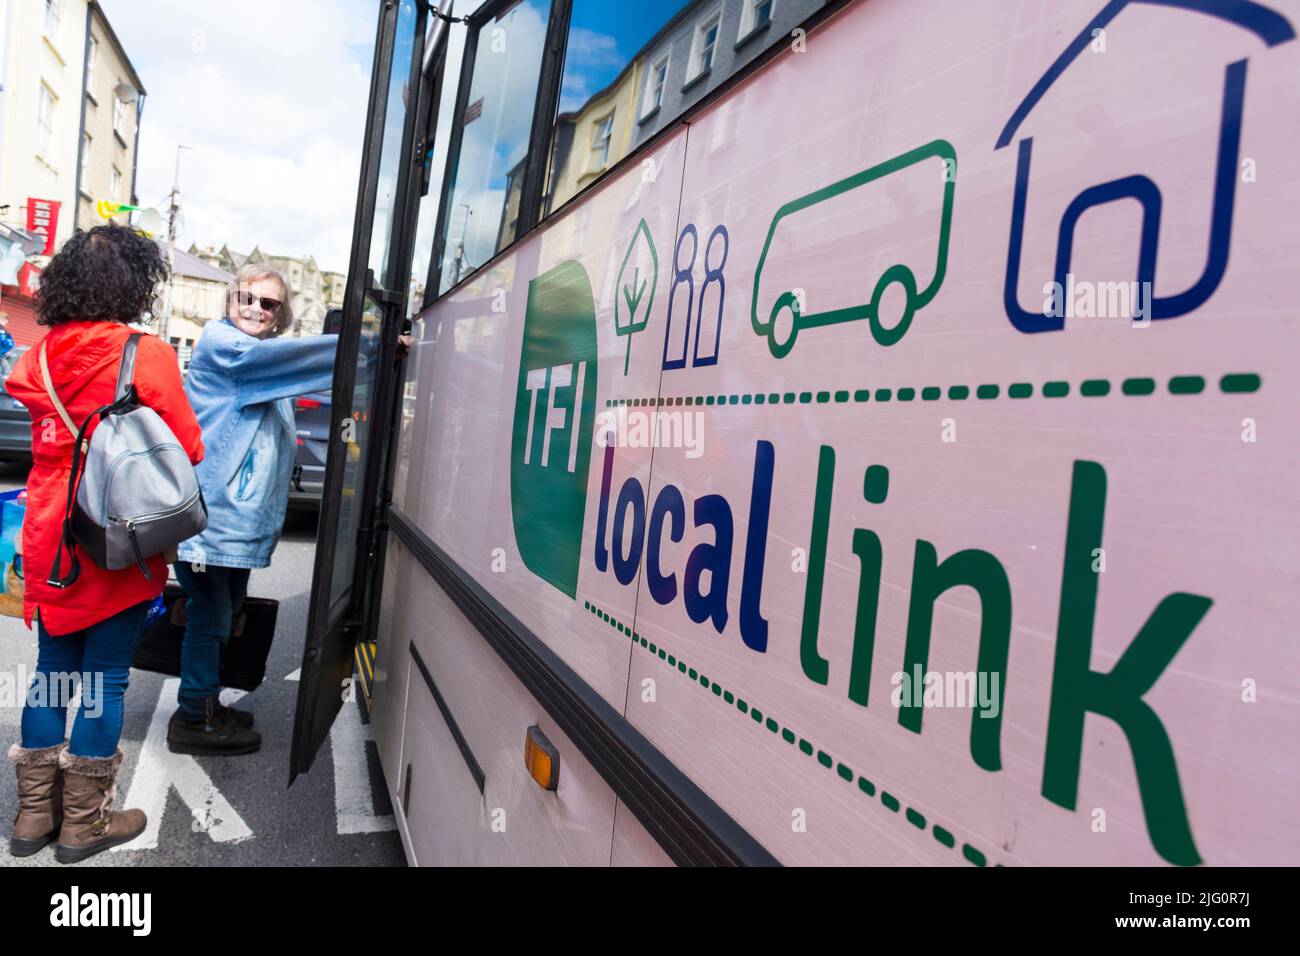 Rural Transport Programme/TFI Local Link bus in Donegal Town, County Donegal, Ireland. Passengers board the bus. Stock Photo